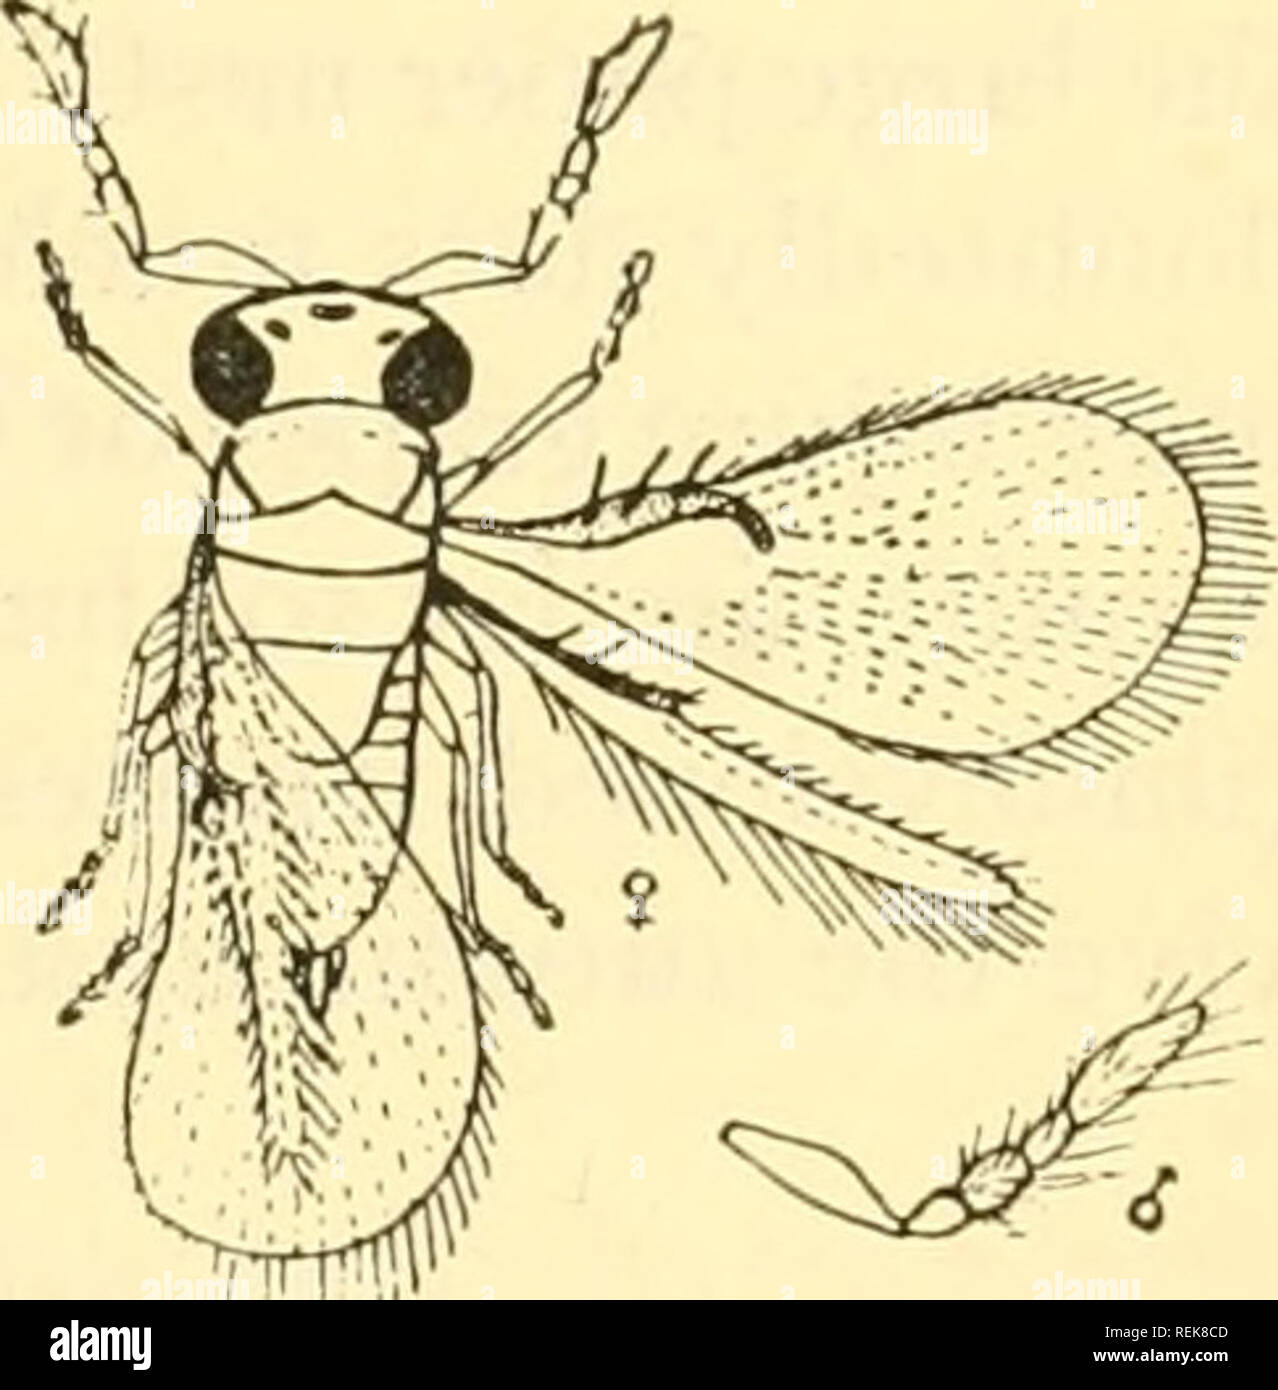 . Class book of economic entomology, with special reference to the economic insects of the northern United States and Canada. Beneficial insects; Insect pests; Insects; Insects. CLASSIFICATION AND DESCRIPTION OF COMMON INSECTS 355 B. Pronotal spot minute.—hordei. BB. Pronotal spot large, distinct. C. Second abdominal segment longer than fourth and fifth together.— secale. CC. Second abdominal segment shorter than fourth and fifth together. —tritici. Apple Seed Chalcid {Syntomaspis druparum Boh.).—An introduced insect from Europe. Weil distributed in the Northern States. Causes deformities and  Stock Photo